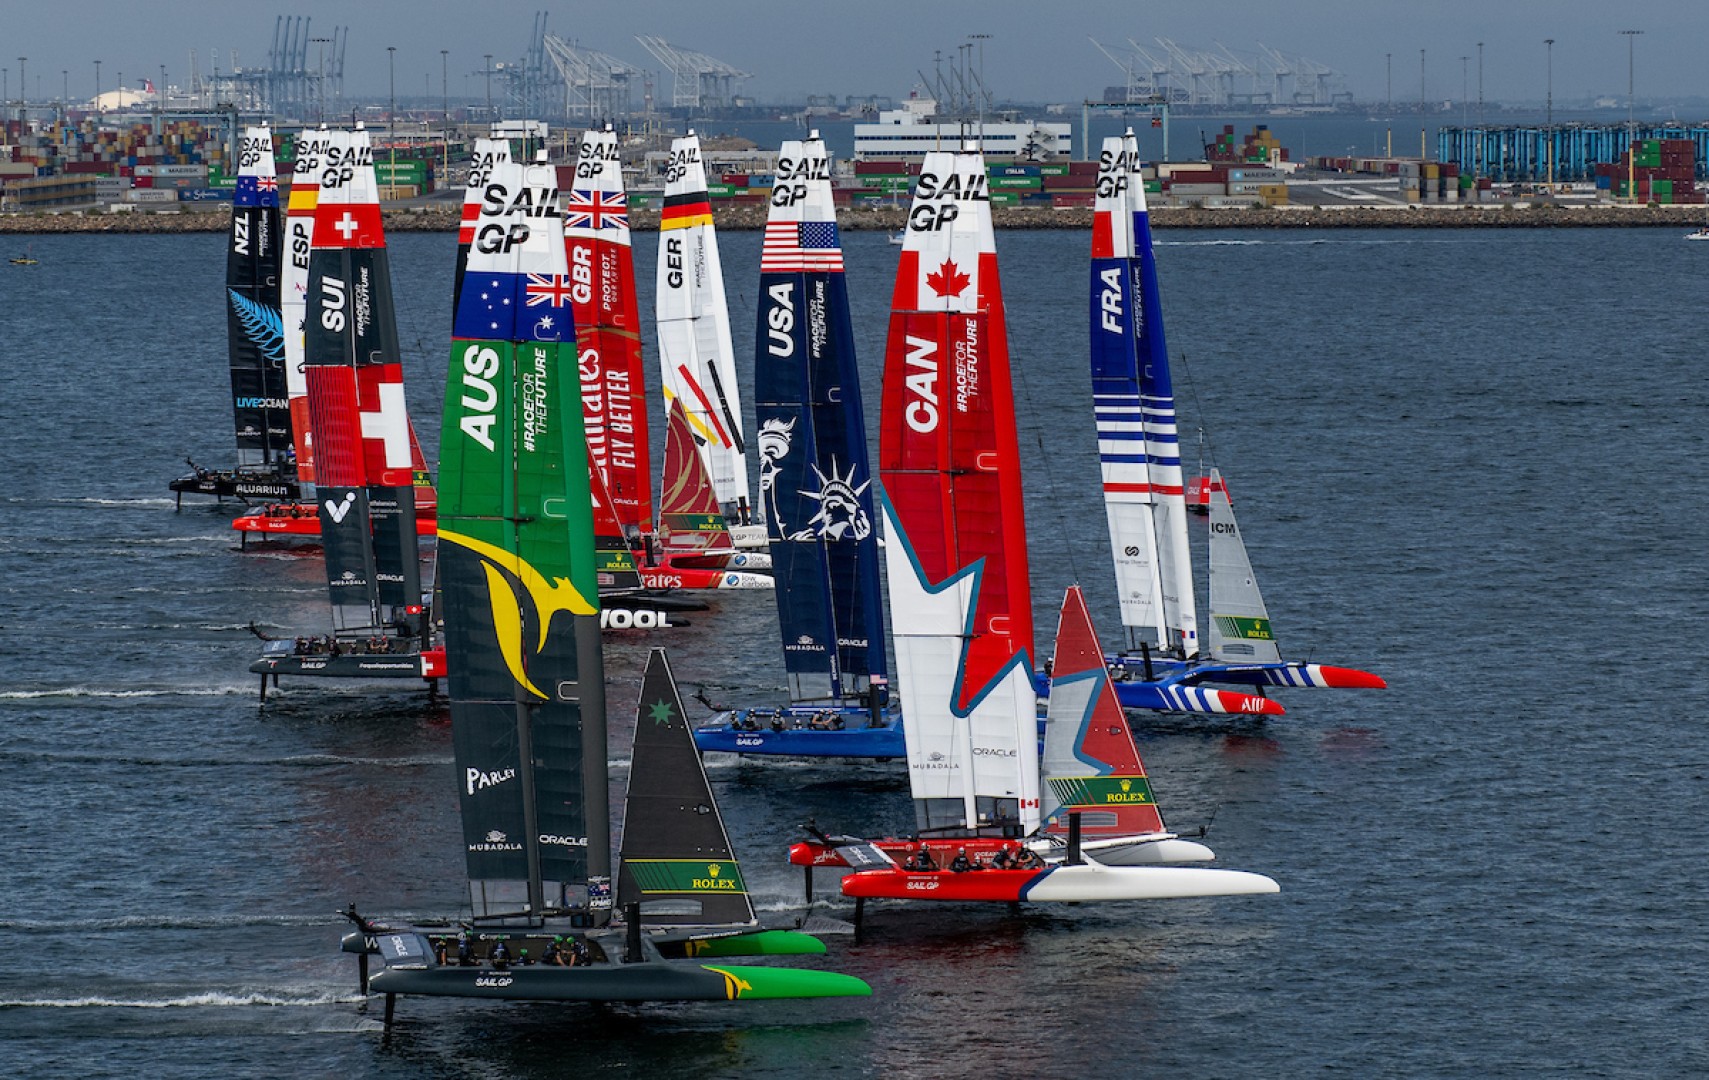 Australia's stars shine brightest on day one in Los Angeles
Tom Slingsby's team leads Emirates Great Britain and ROCKWOOL Denmark at Oracle Los Angeles Sail Grand Prix